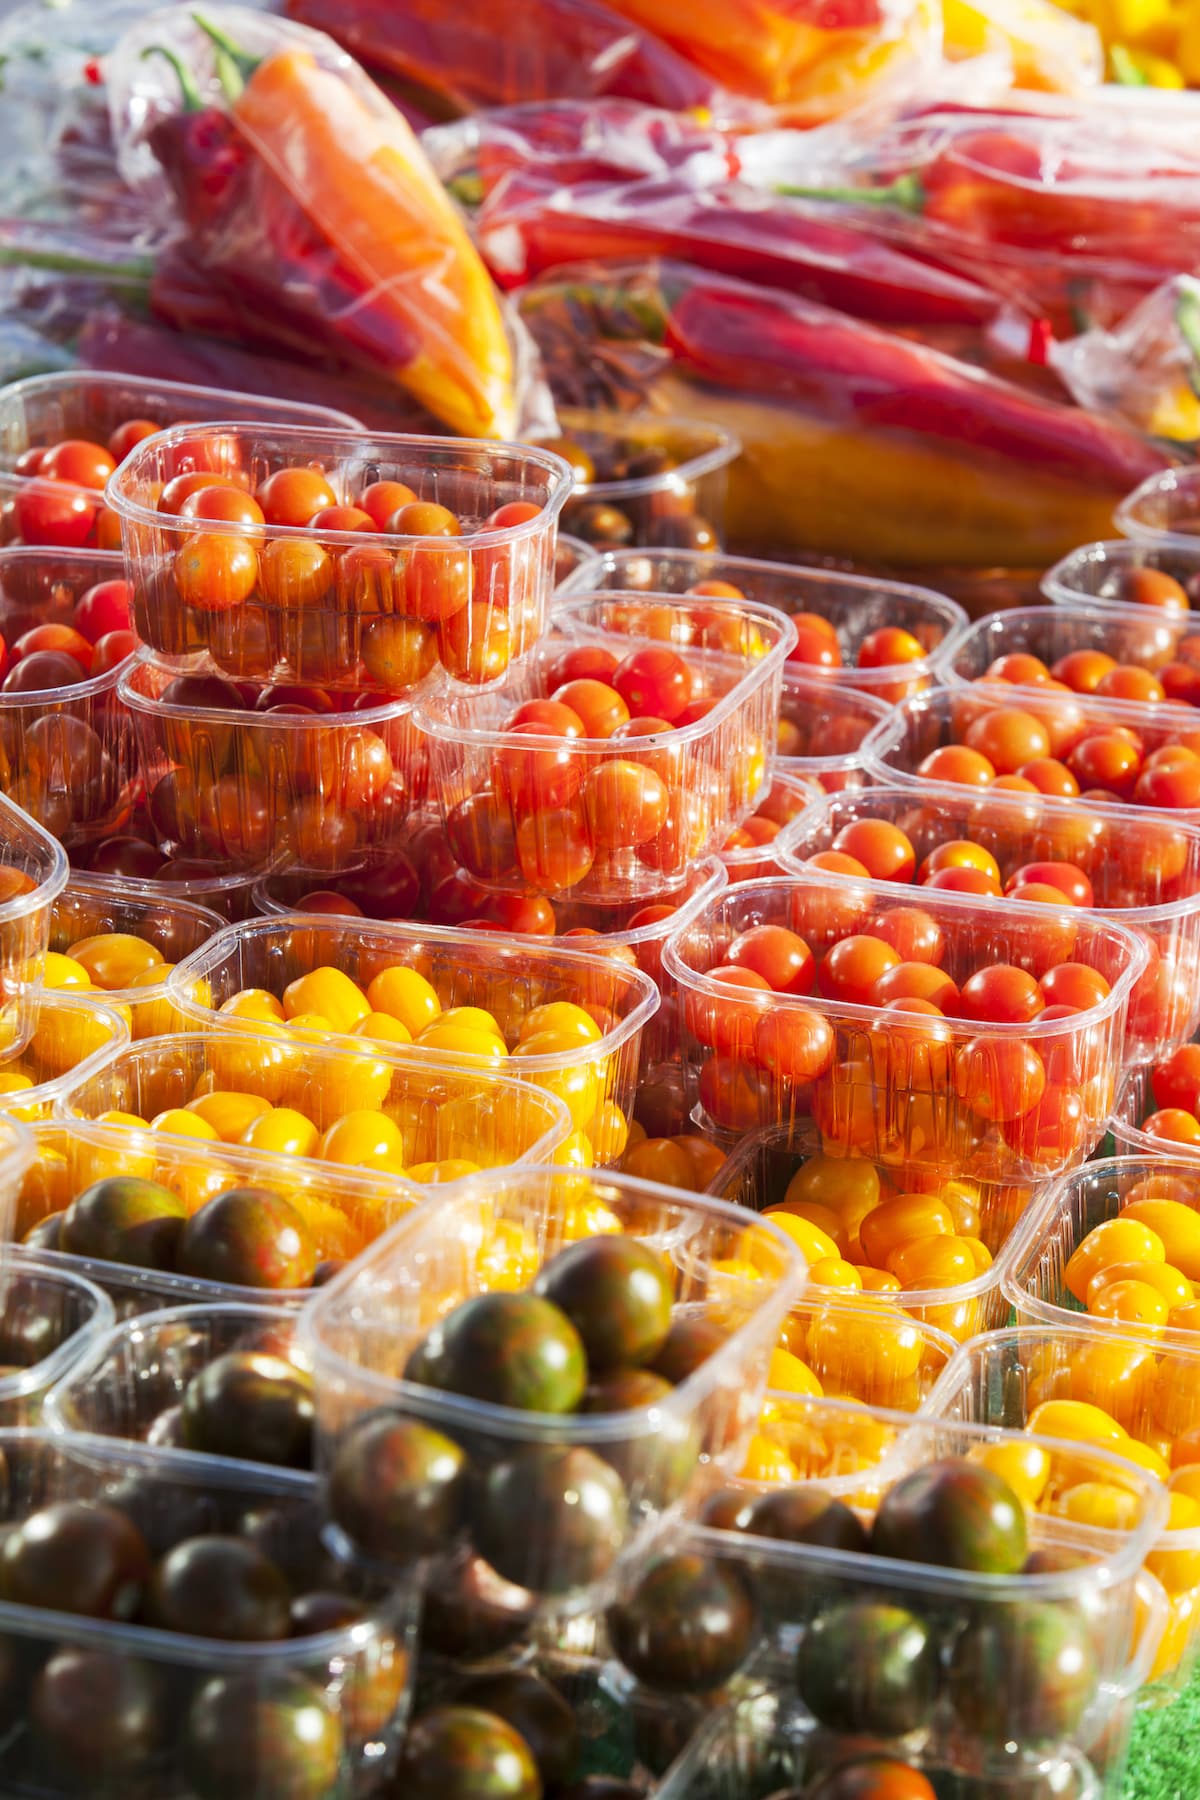 Tomatoes in plastic containers at a farmers market in Cumbria, UK